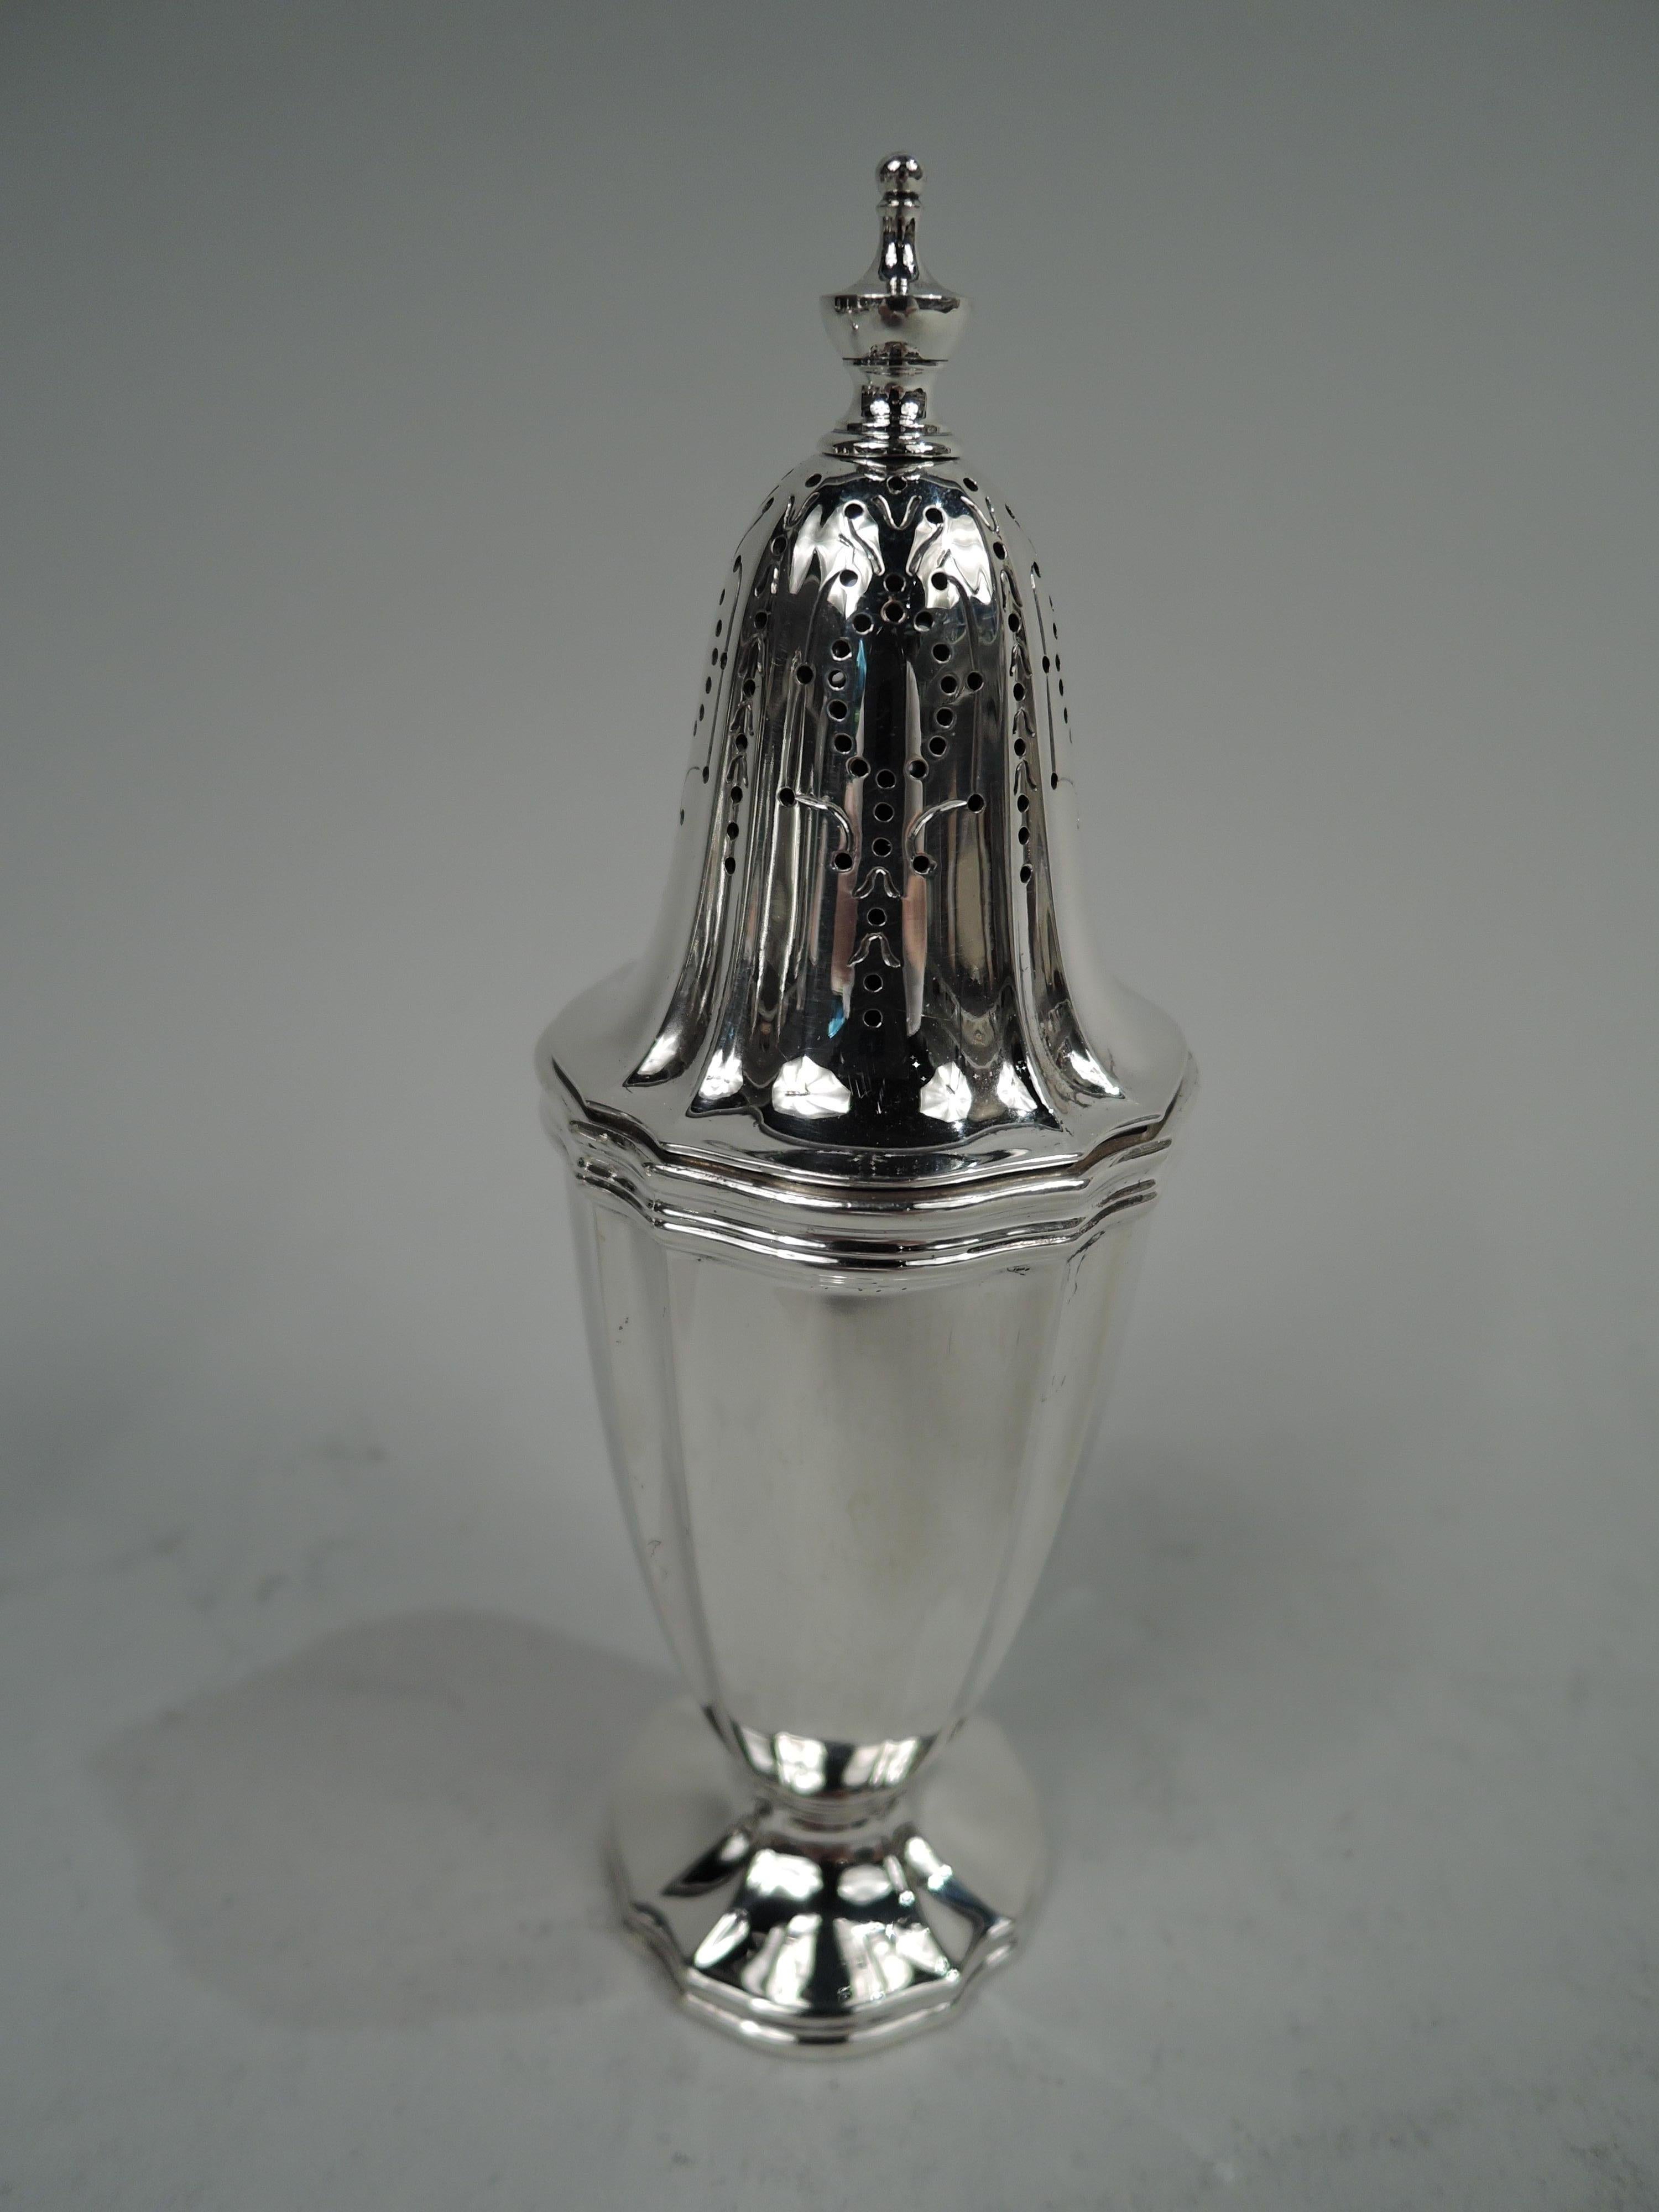 Pair of Edwardian Classical sterling silver salt and pepper shakers. Made by Tiffany & Co. in New York, ca 1910. Each: Tapering ovoid body on raised foot. Cover dimed with ornamental piercing and vasiform finial. Fluting and reeding. Fully marked